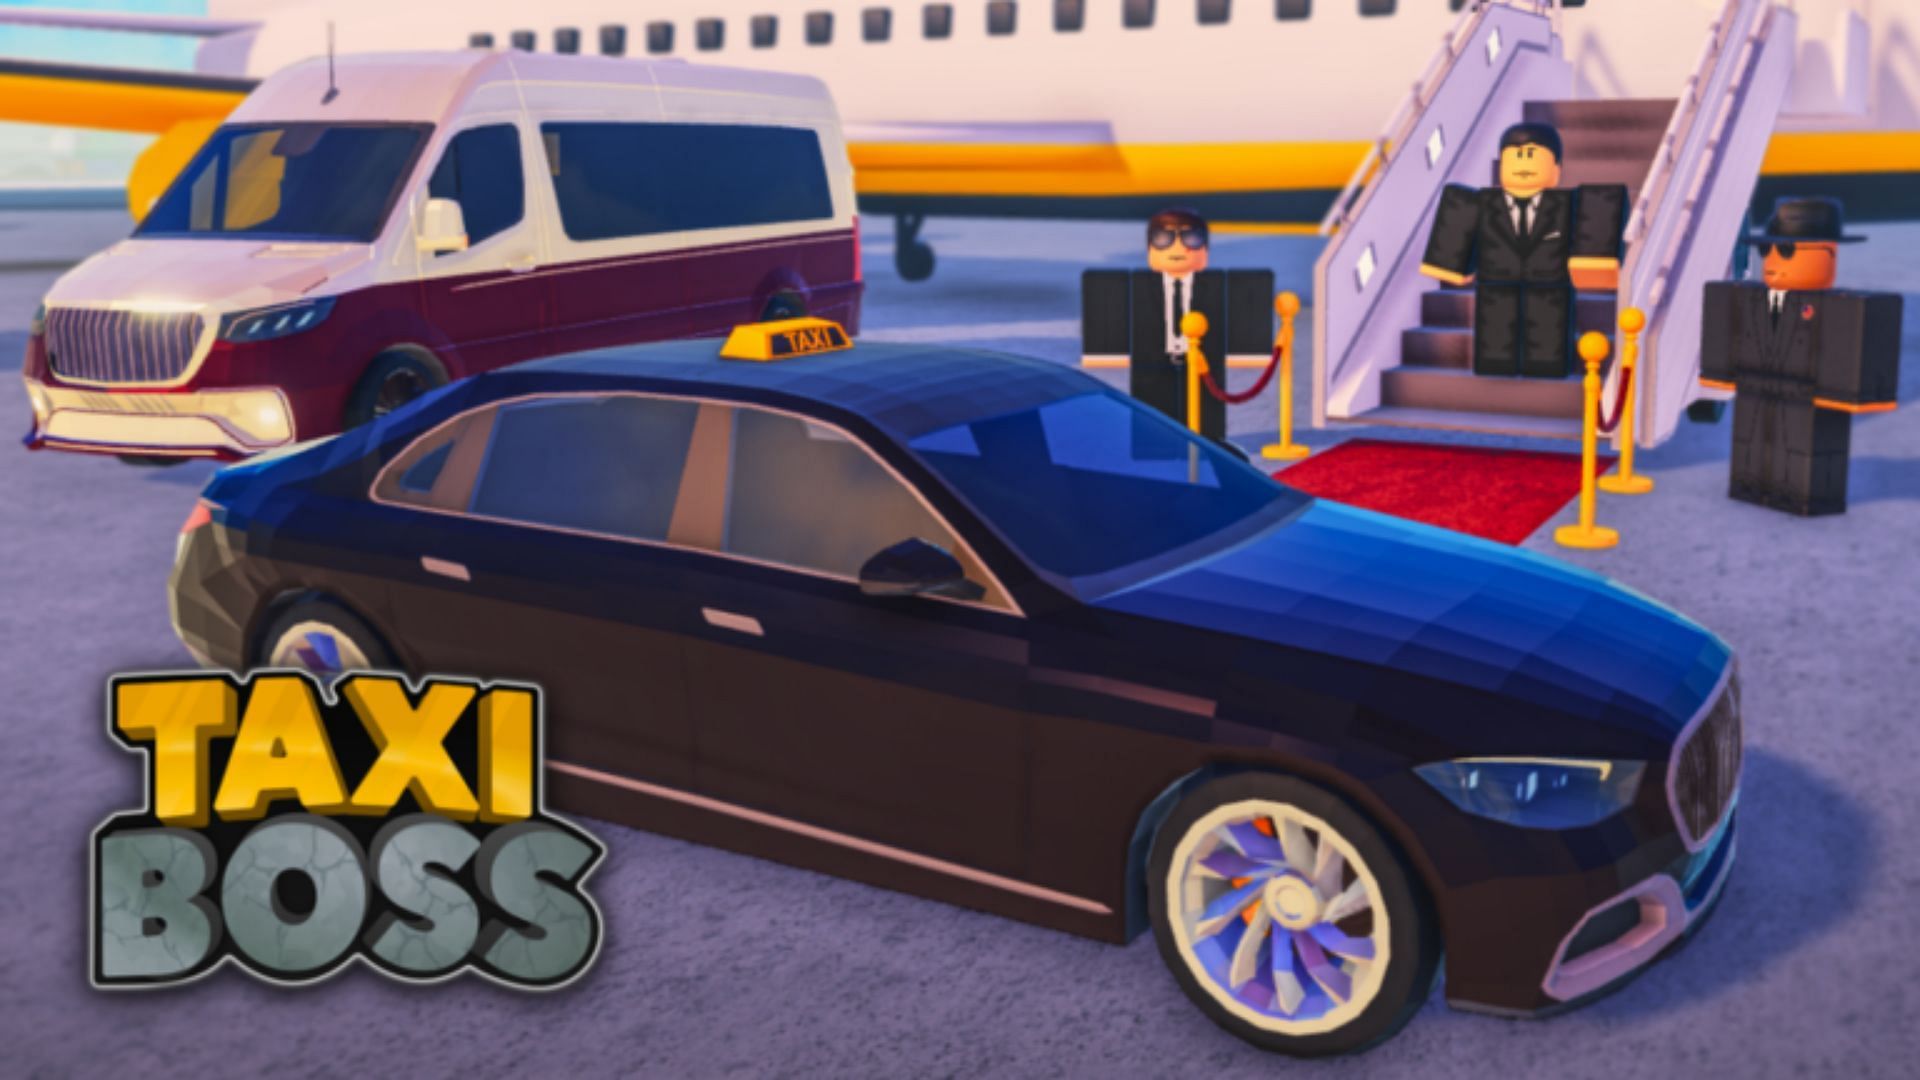 Codes for Taxi Boss and their importance (Image via Roblox)